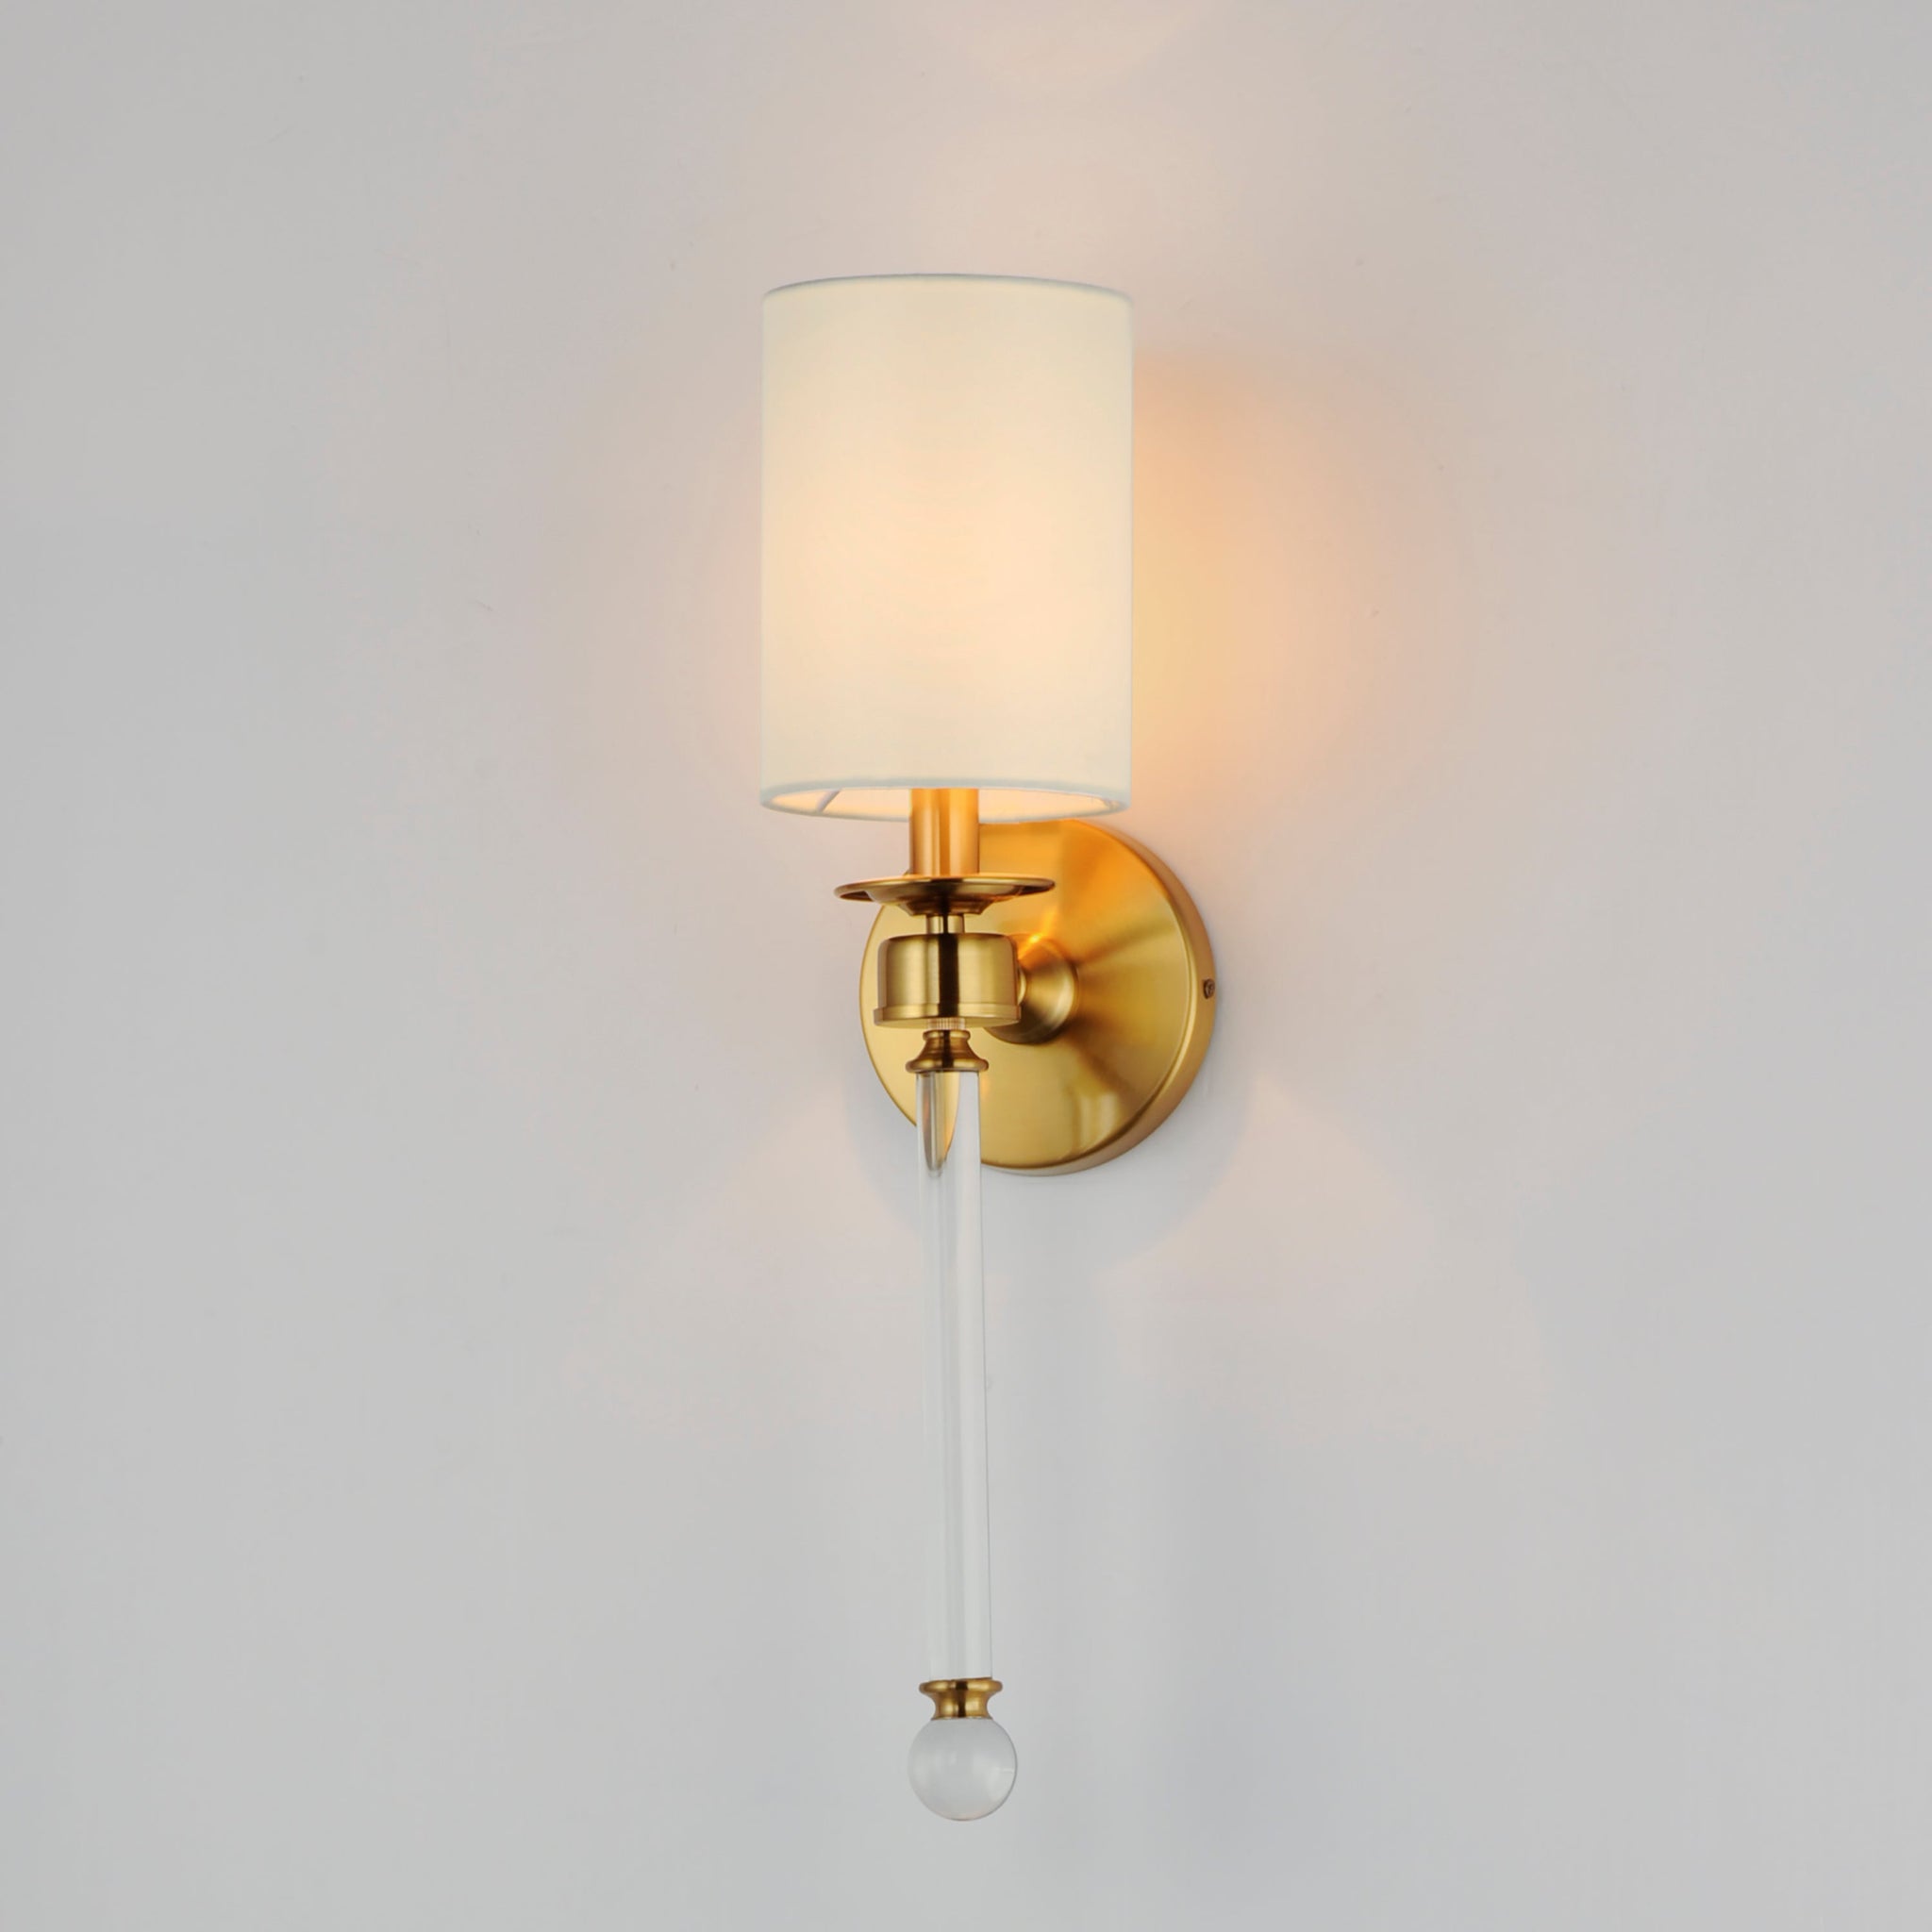 Lucent 1-Light Wall Sconce